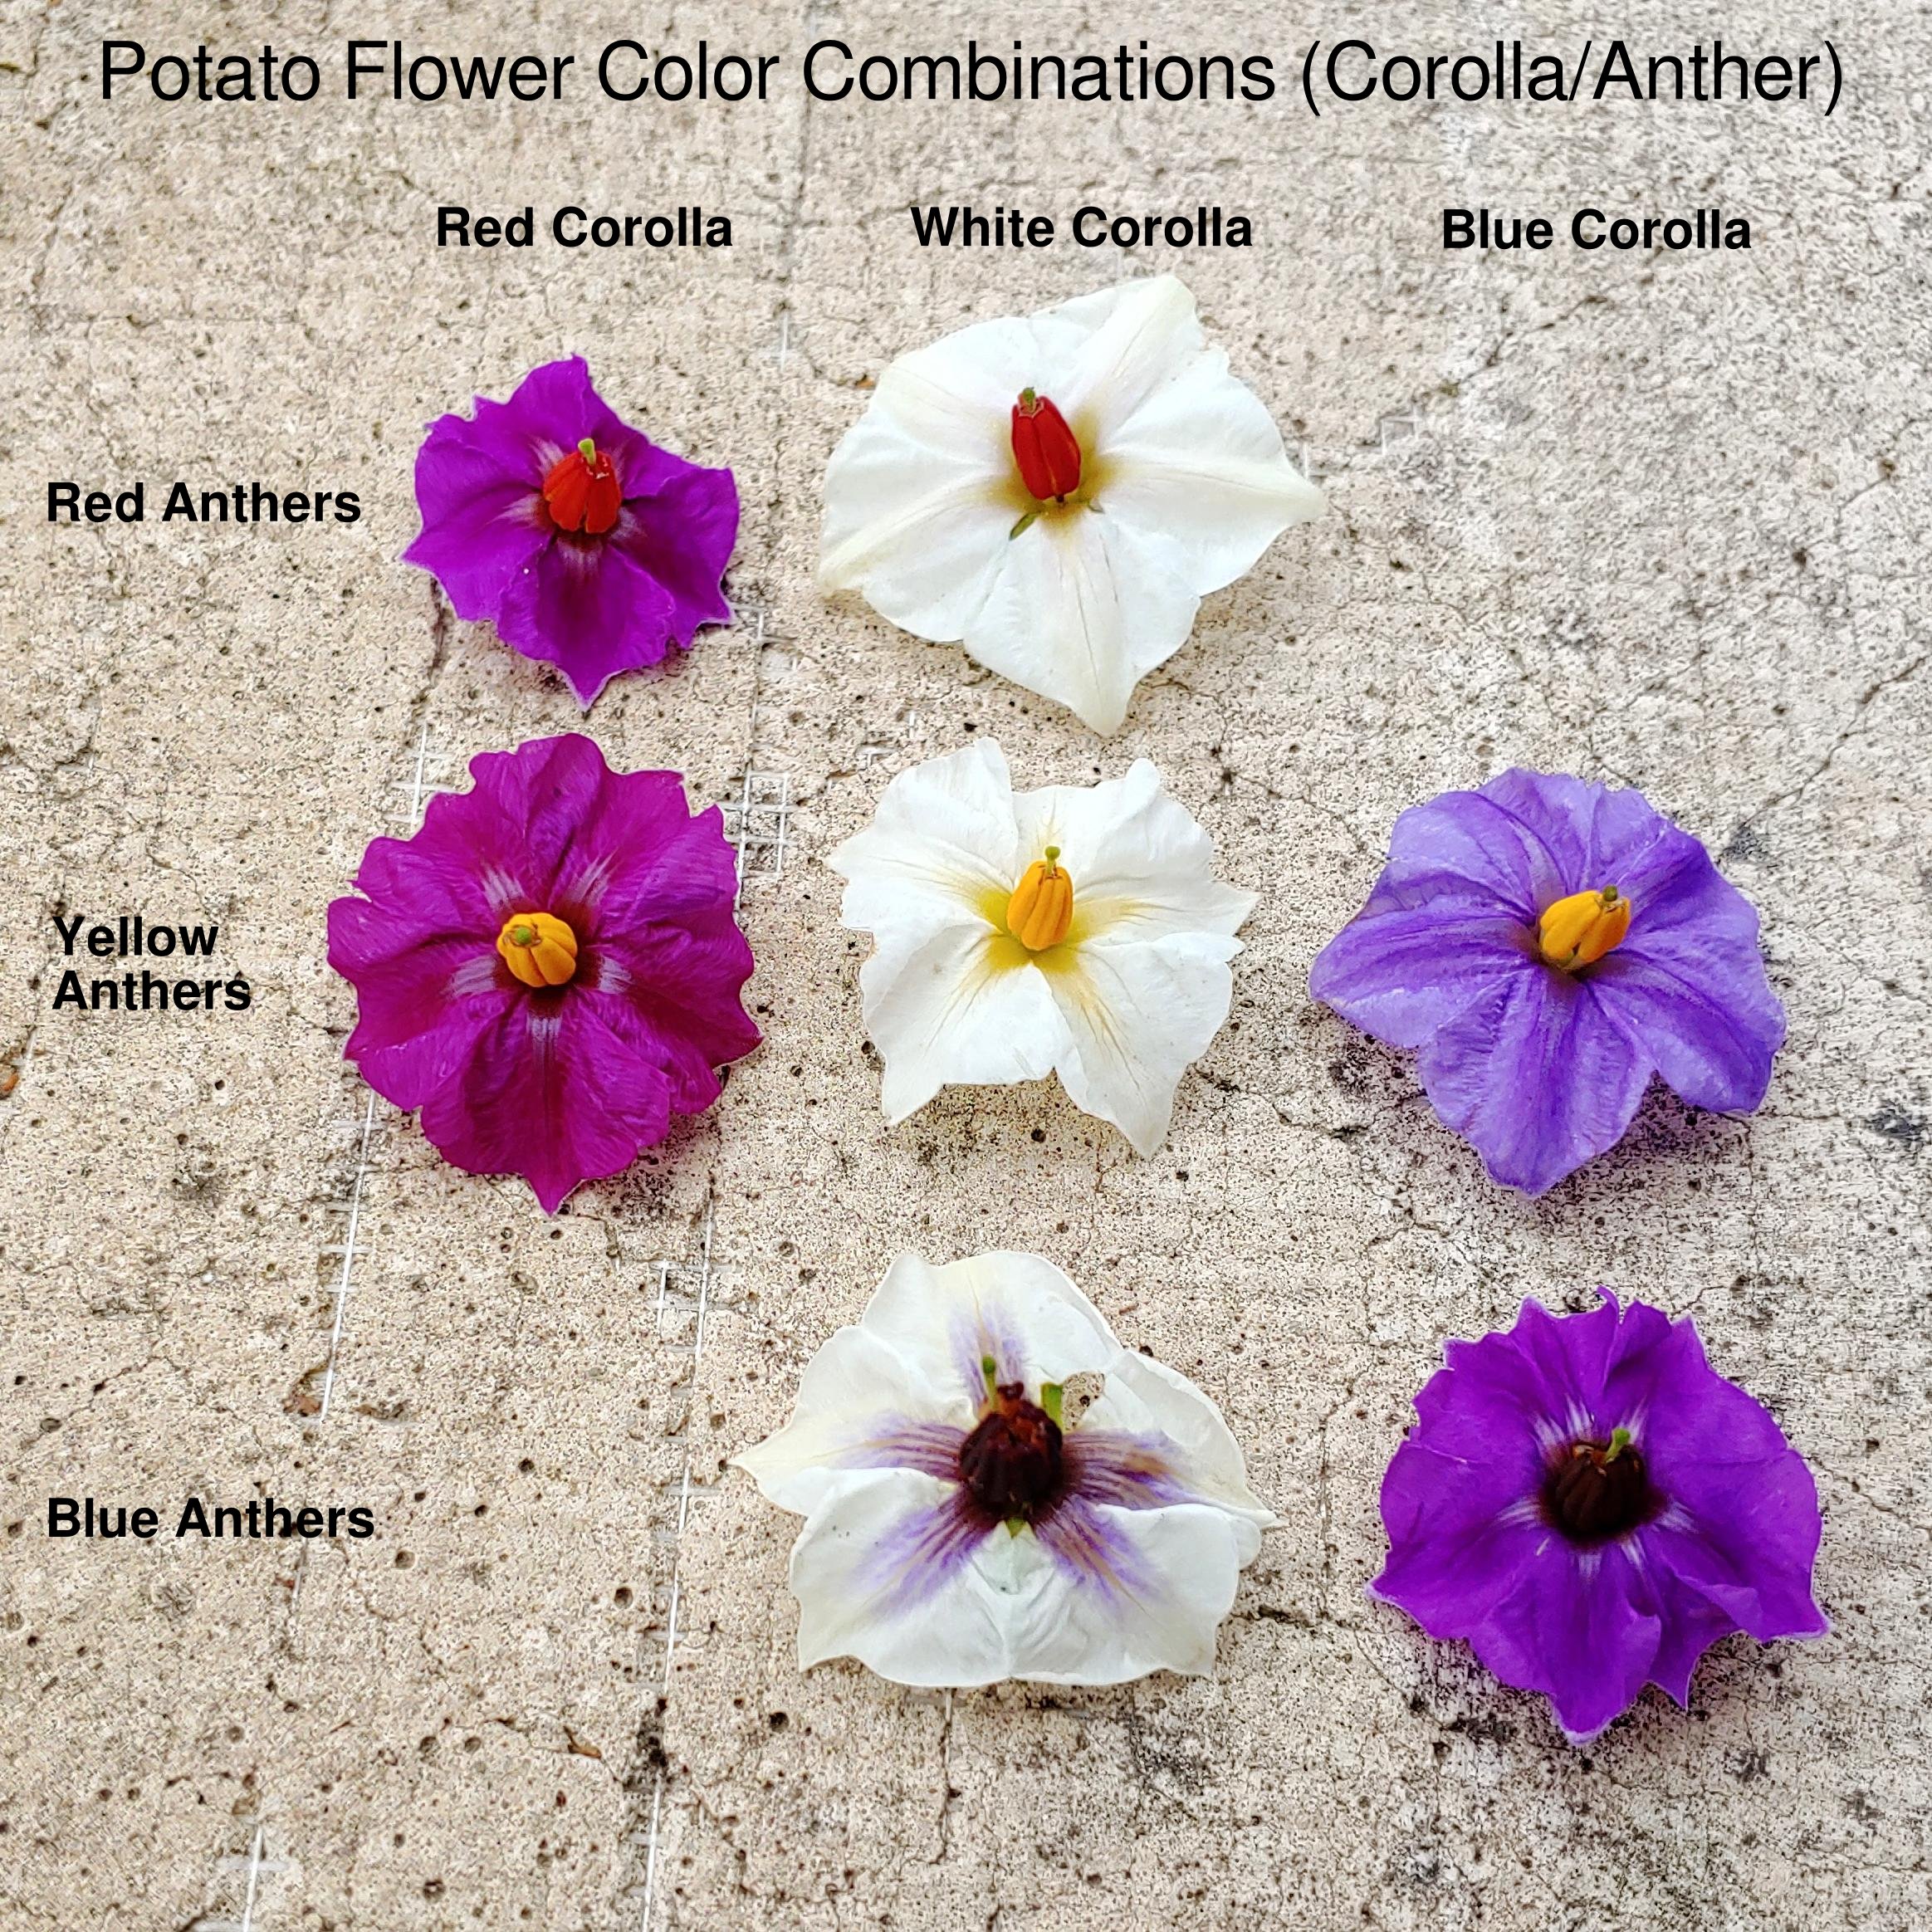 Why Plants Have Bright Colored Flowers - Flower Color Significance